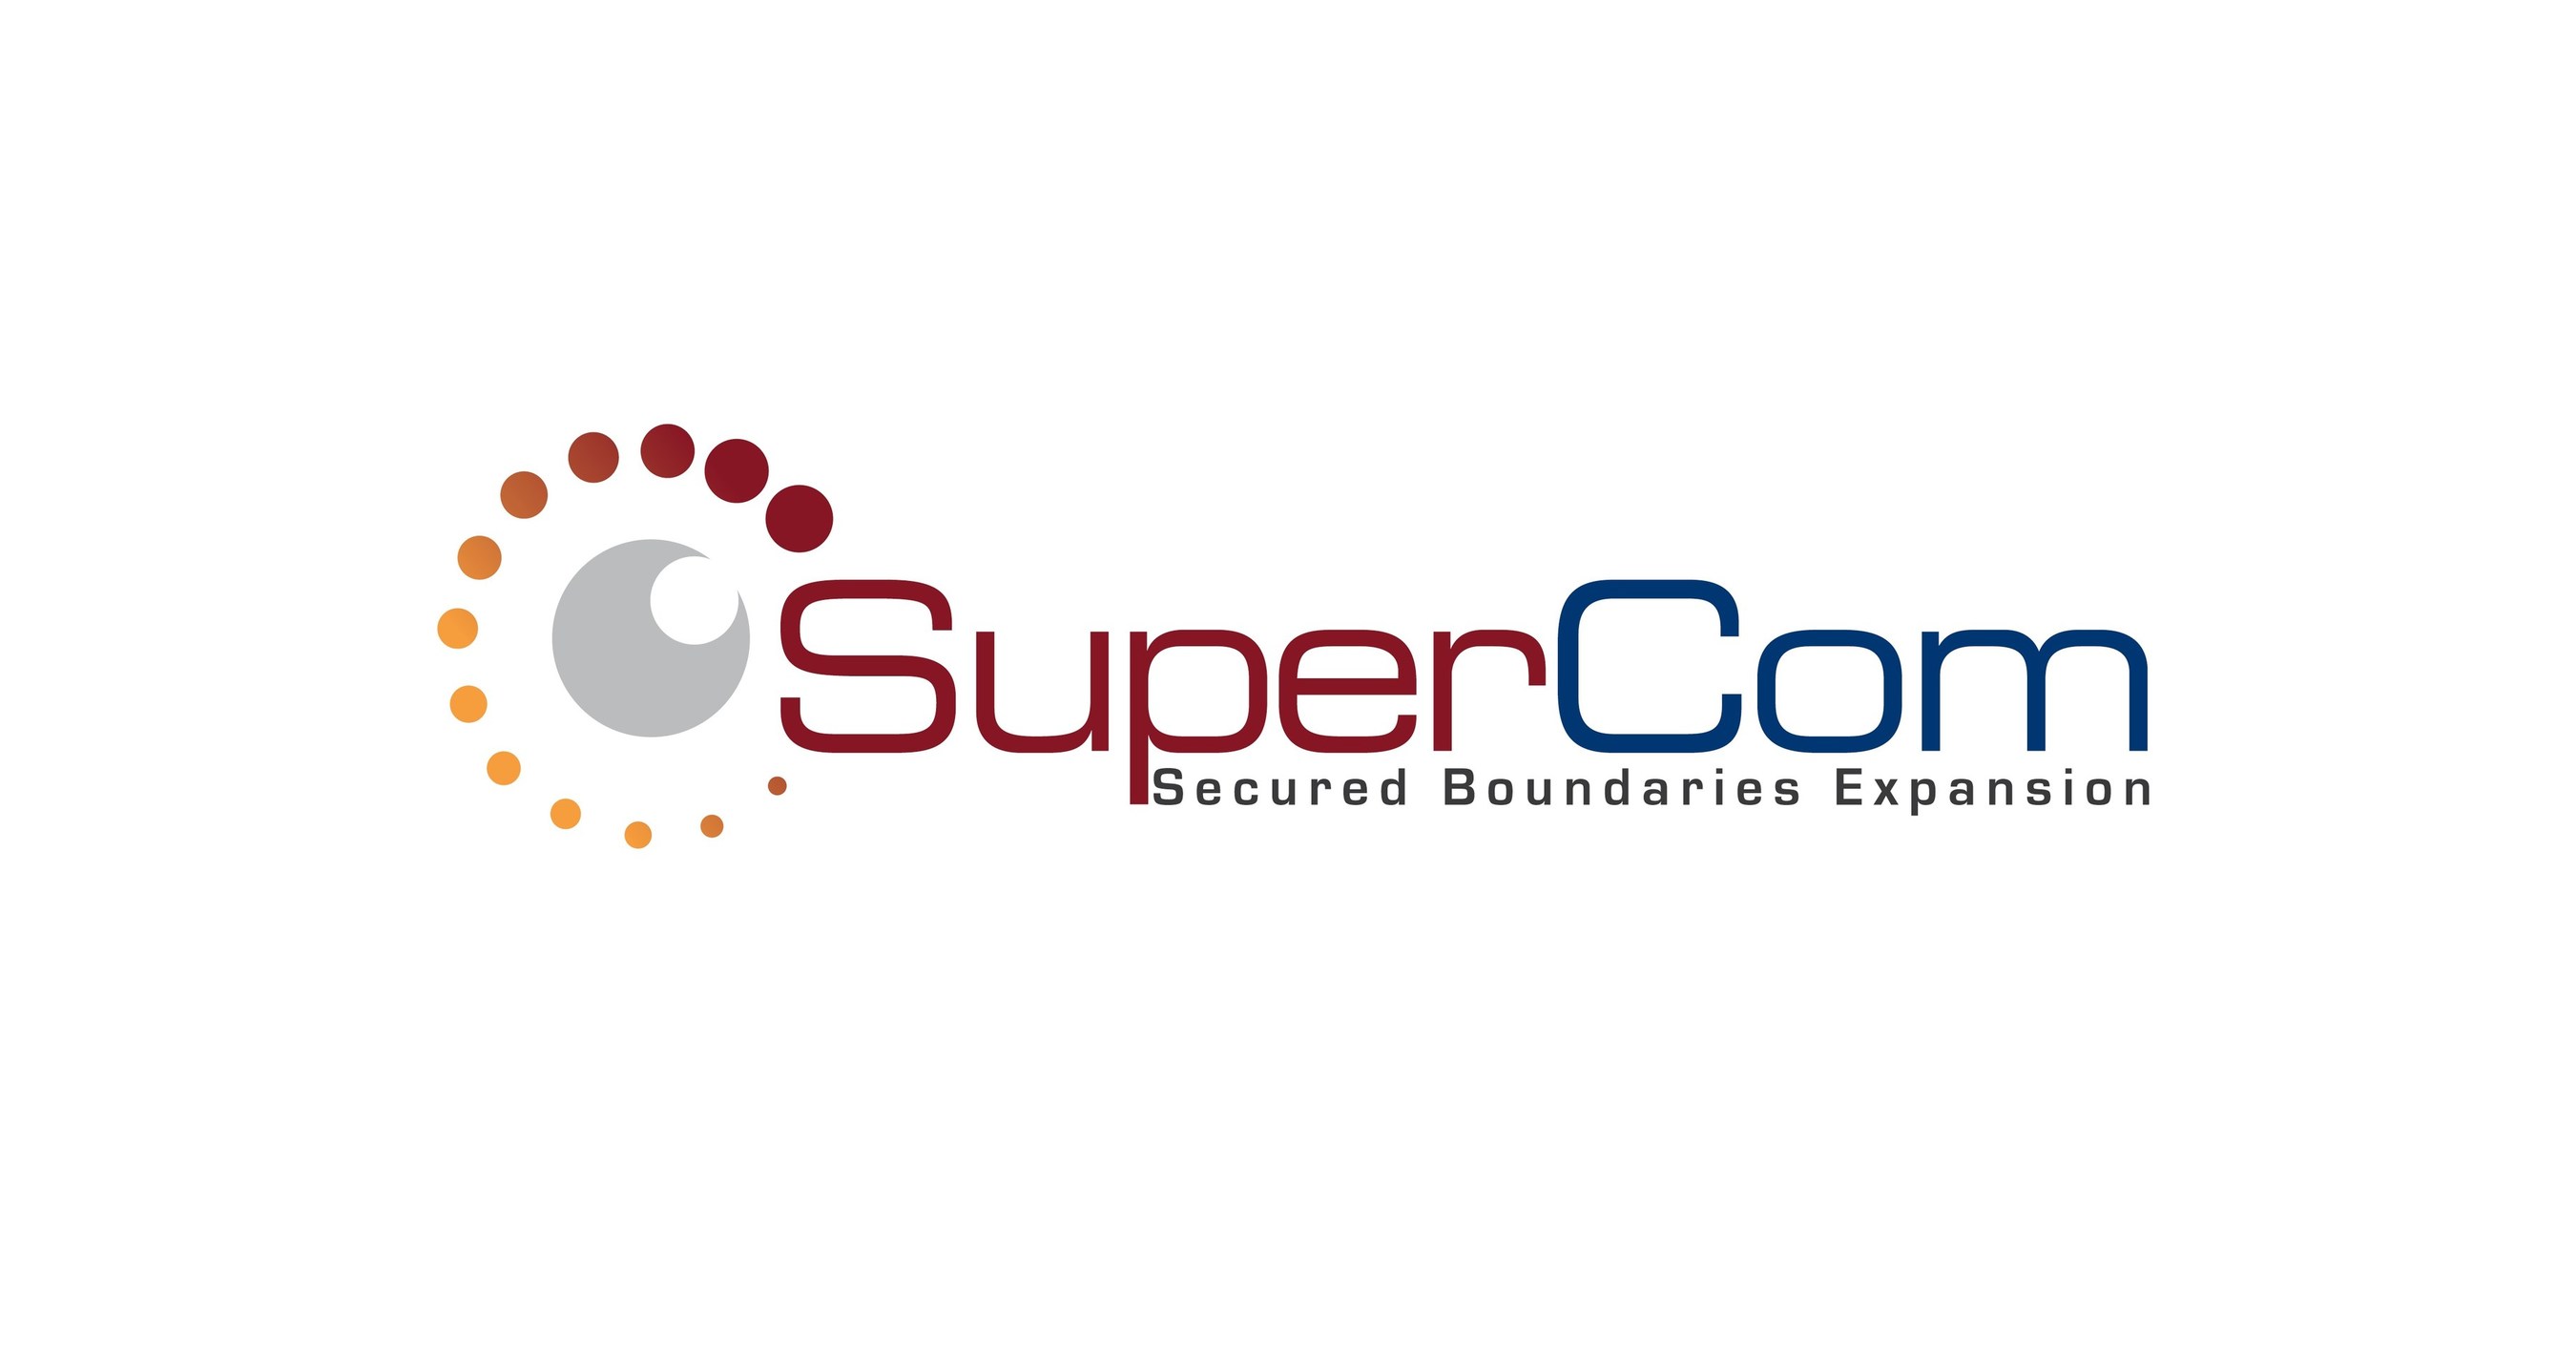 SuperCom Stock Earns Bullish Nod As Investors Show Interest In Its Real-Time Monitoring Technology 